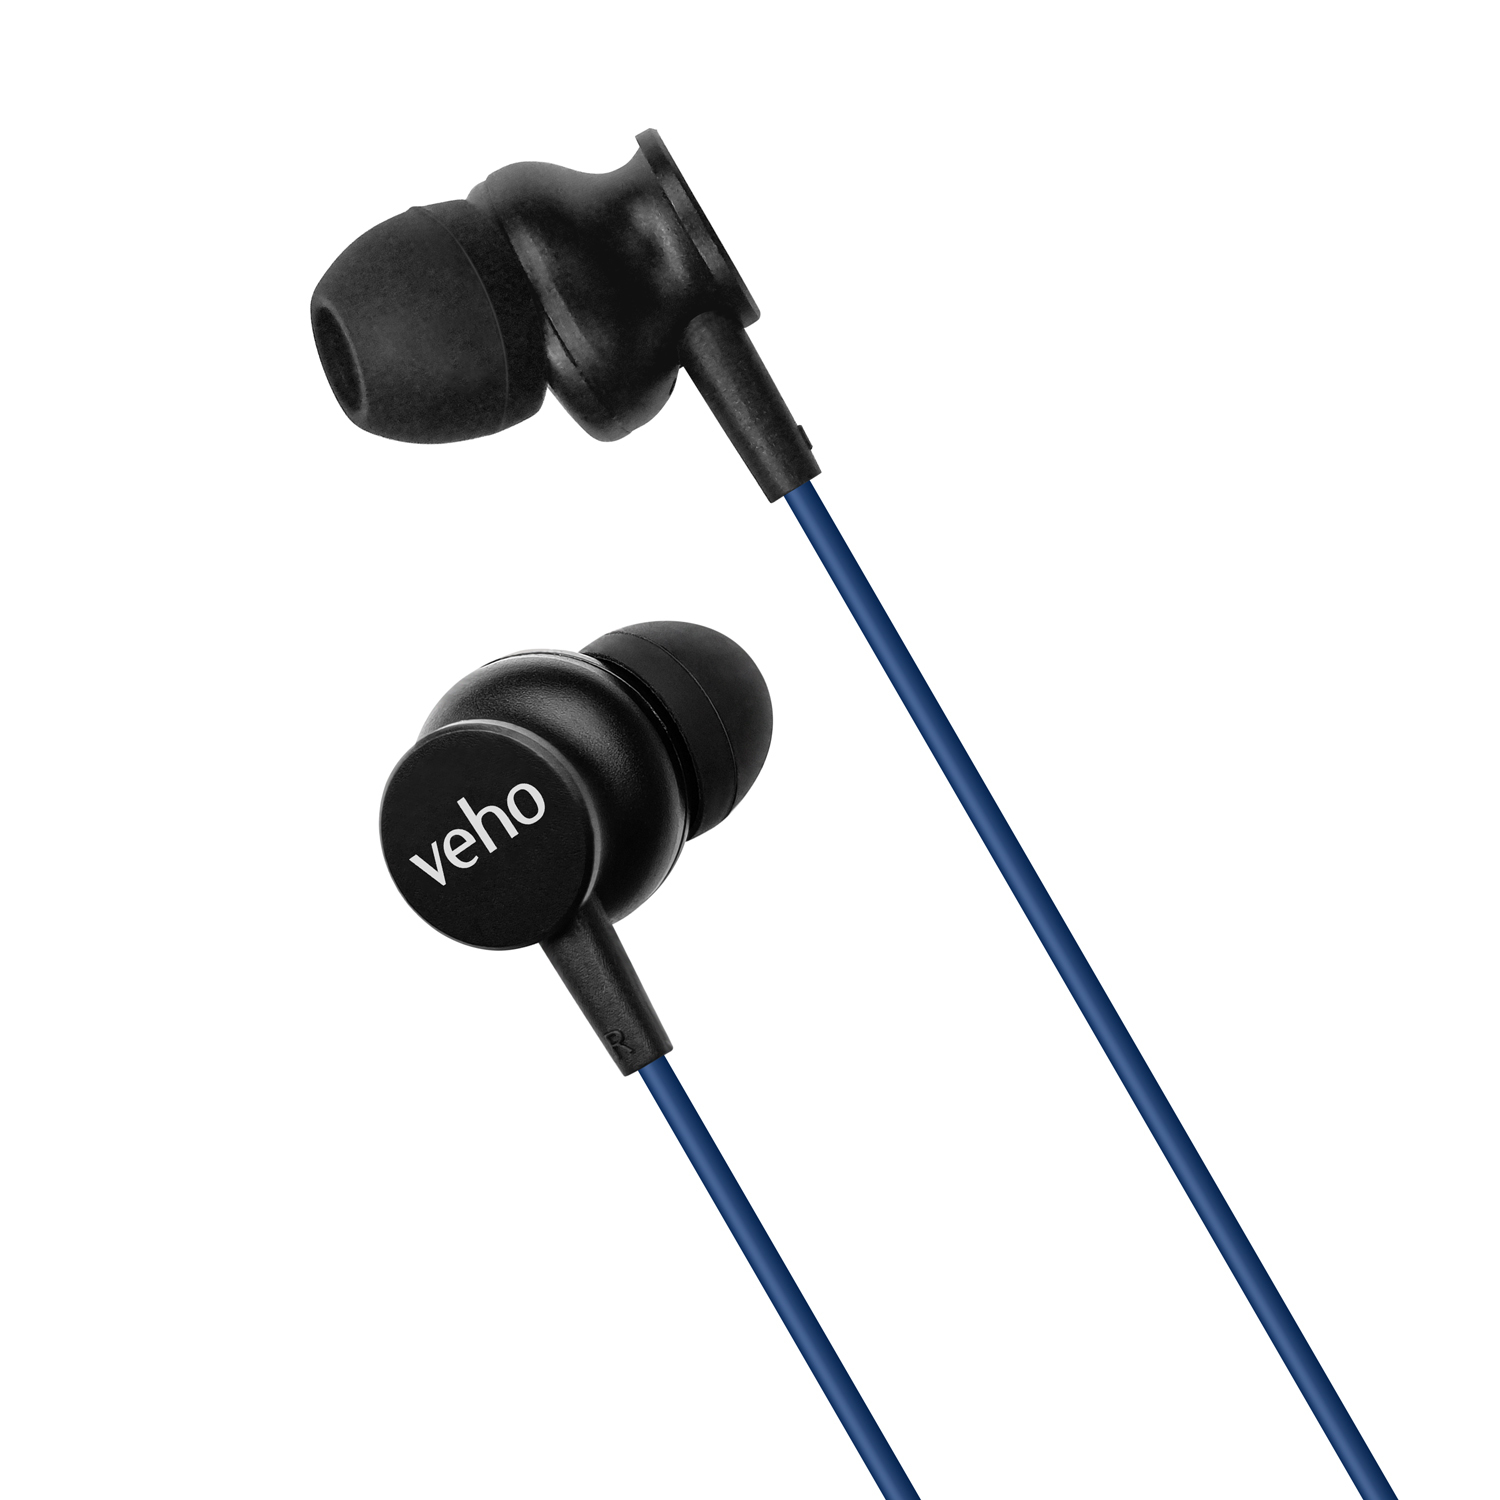 Veho Z-3 In-Ear Stereo Headphones with Built-in Microphone and Remote Control  Black (VEP-104-Z3-B)